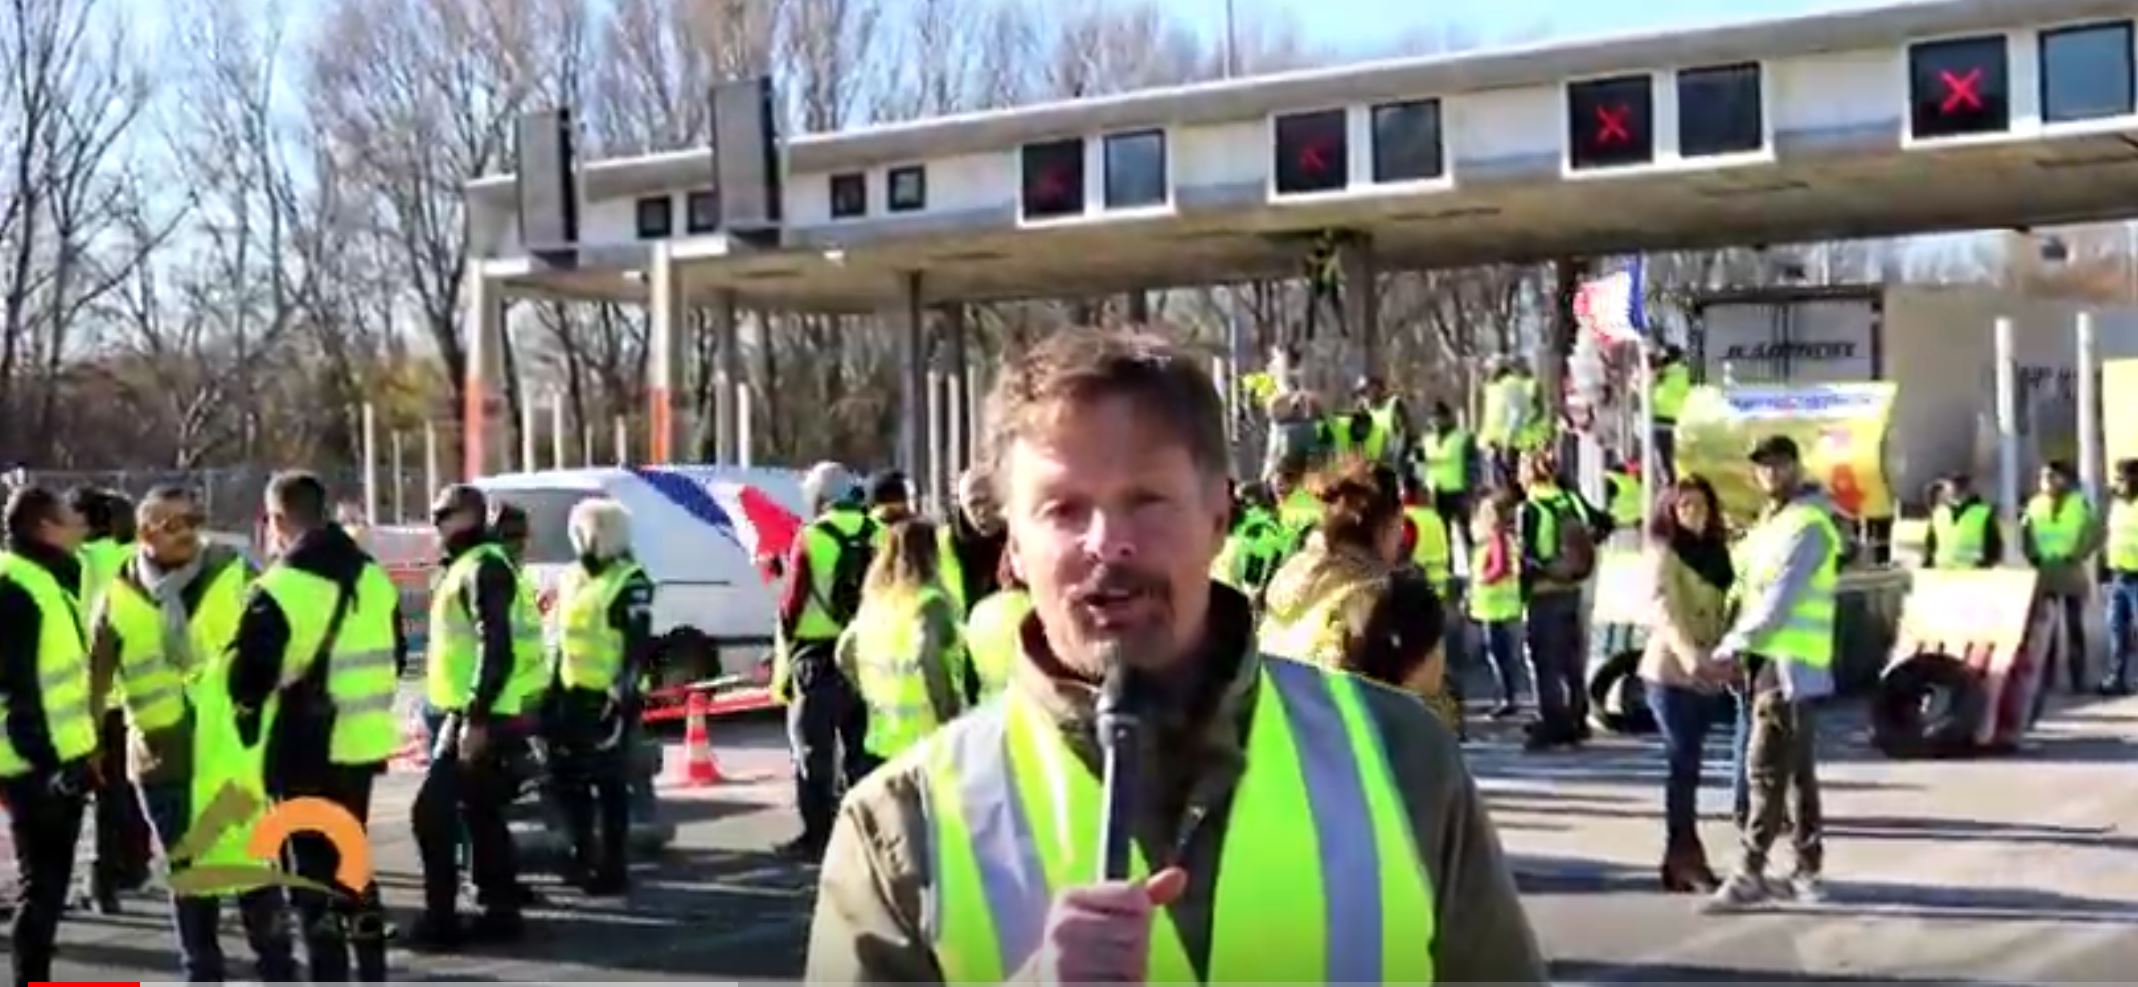 VIDEO: CFACT with the yellow vests